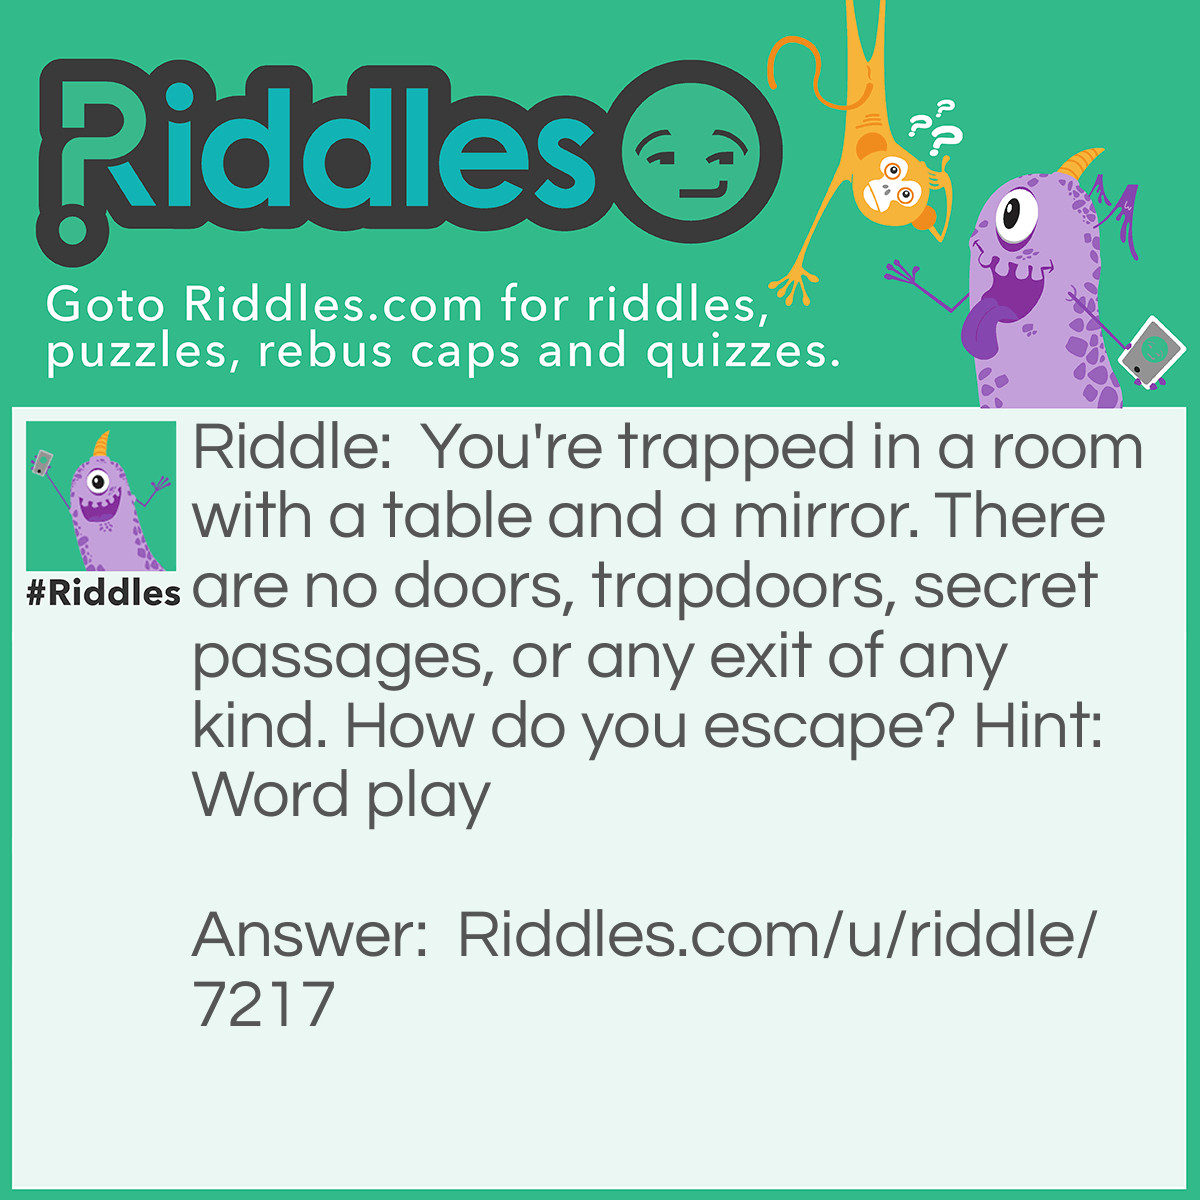 Riddle: You're trapped in a room with a table and a mirror. There are no doors, trapdoors, secret passages, or any exit of any kind. How do you escape? Hint: Word play Answer: You look in the mirror, you see what you saw, you take the saw, saw the table in half, two halves makes a whole, jump through the hole.